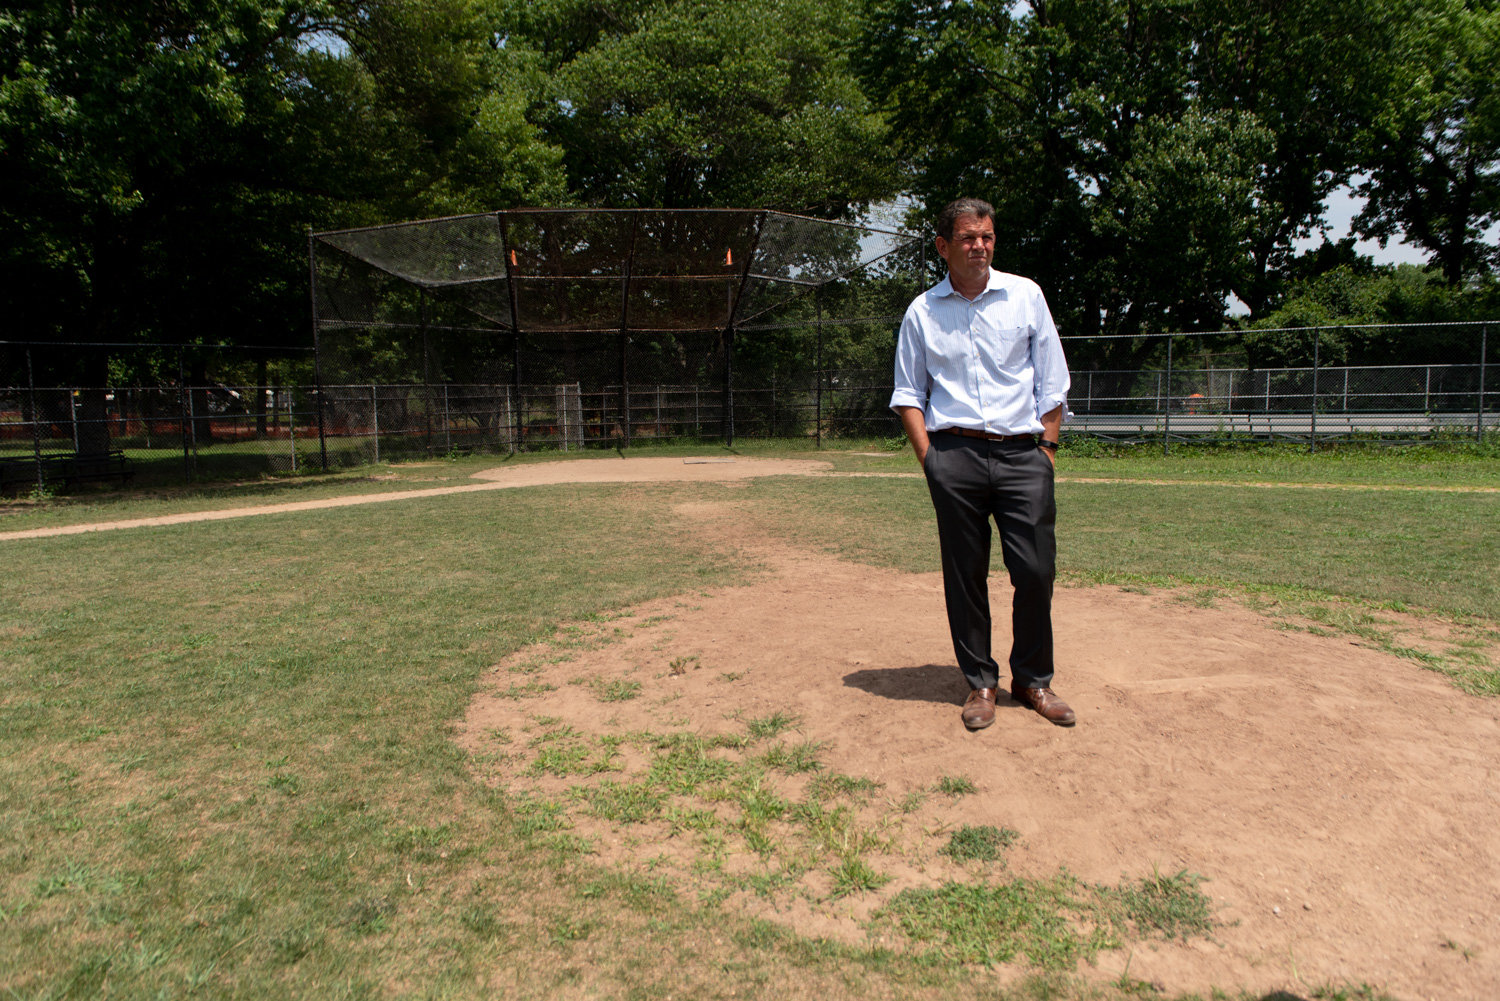 Rob Walsh, senior advisor to Manhattan College’s president, has been pushing fo the city to renovate the ballfields in Van Cortlandt Park, and endorses the idea of naming it honor of Joseph Coppo, a 1975 graduate of the school who died on Sept. 11, 2001.